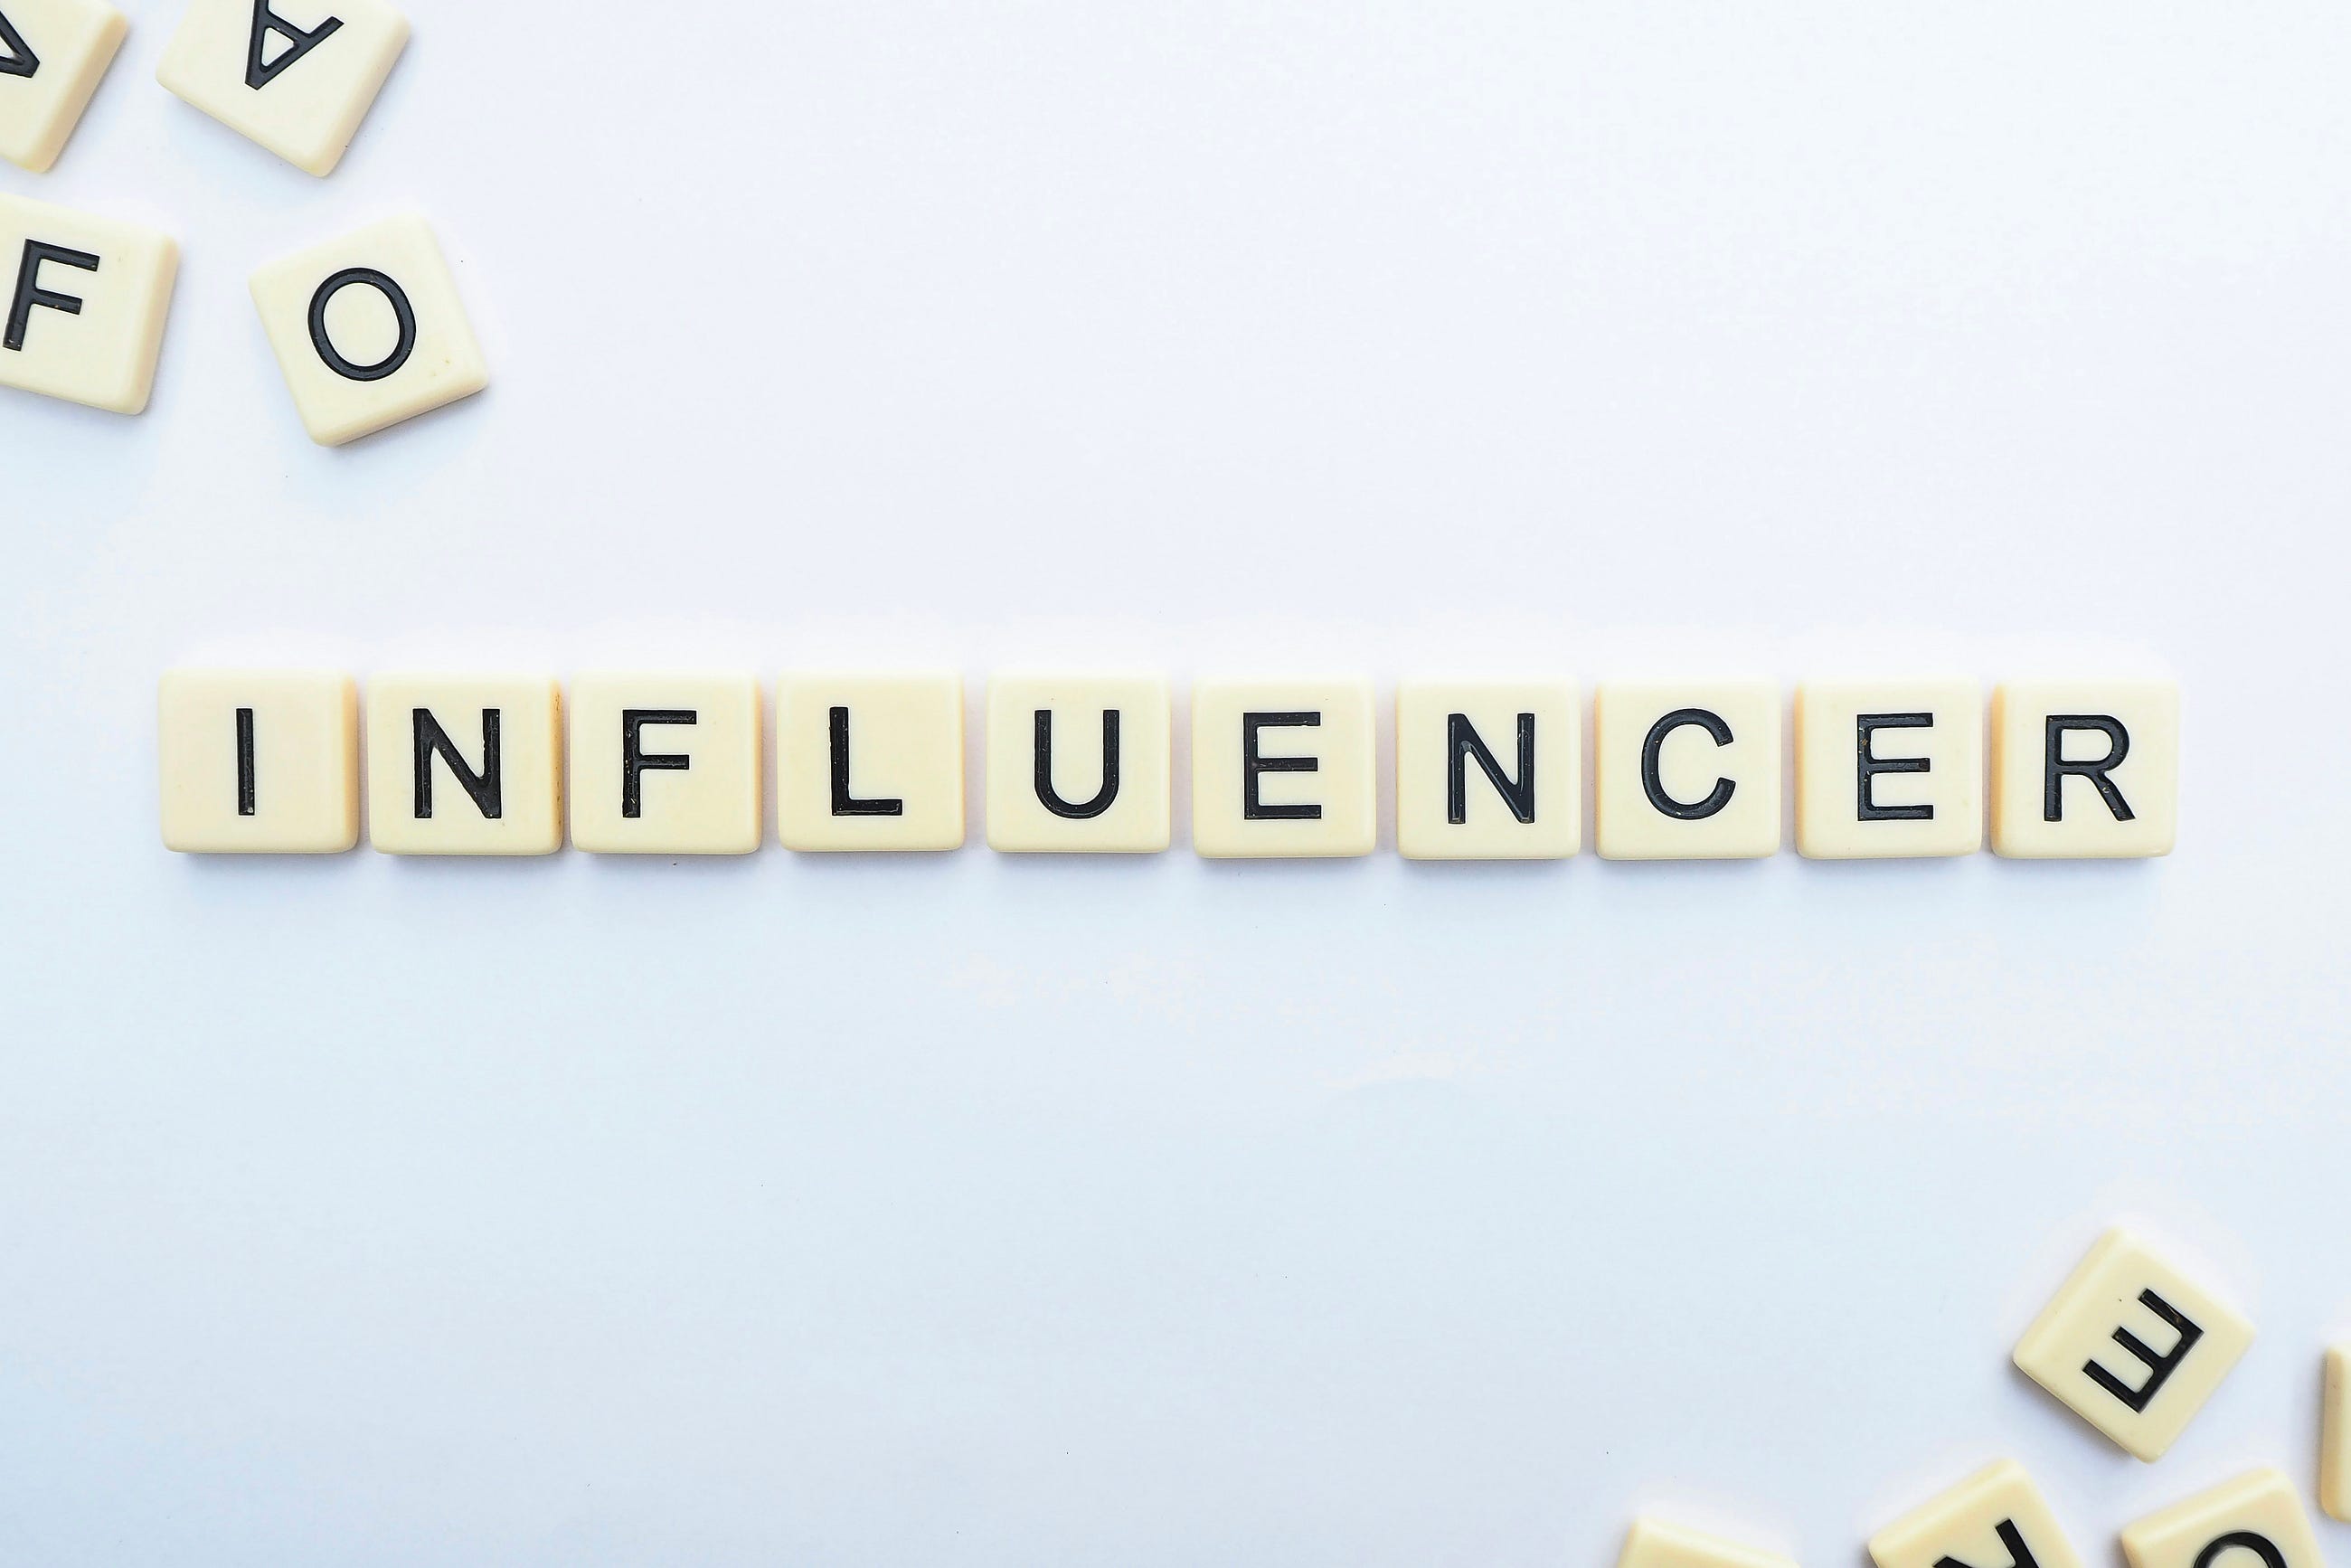 Finding Your Brand’s Voice Through the Right Influencers